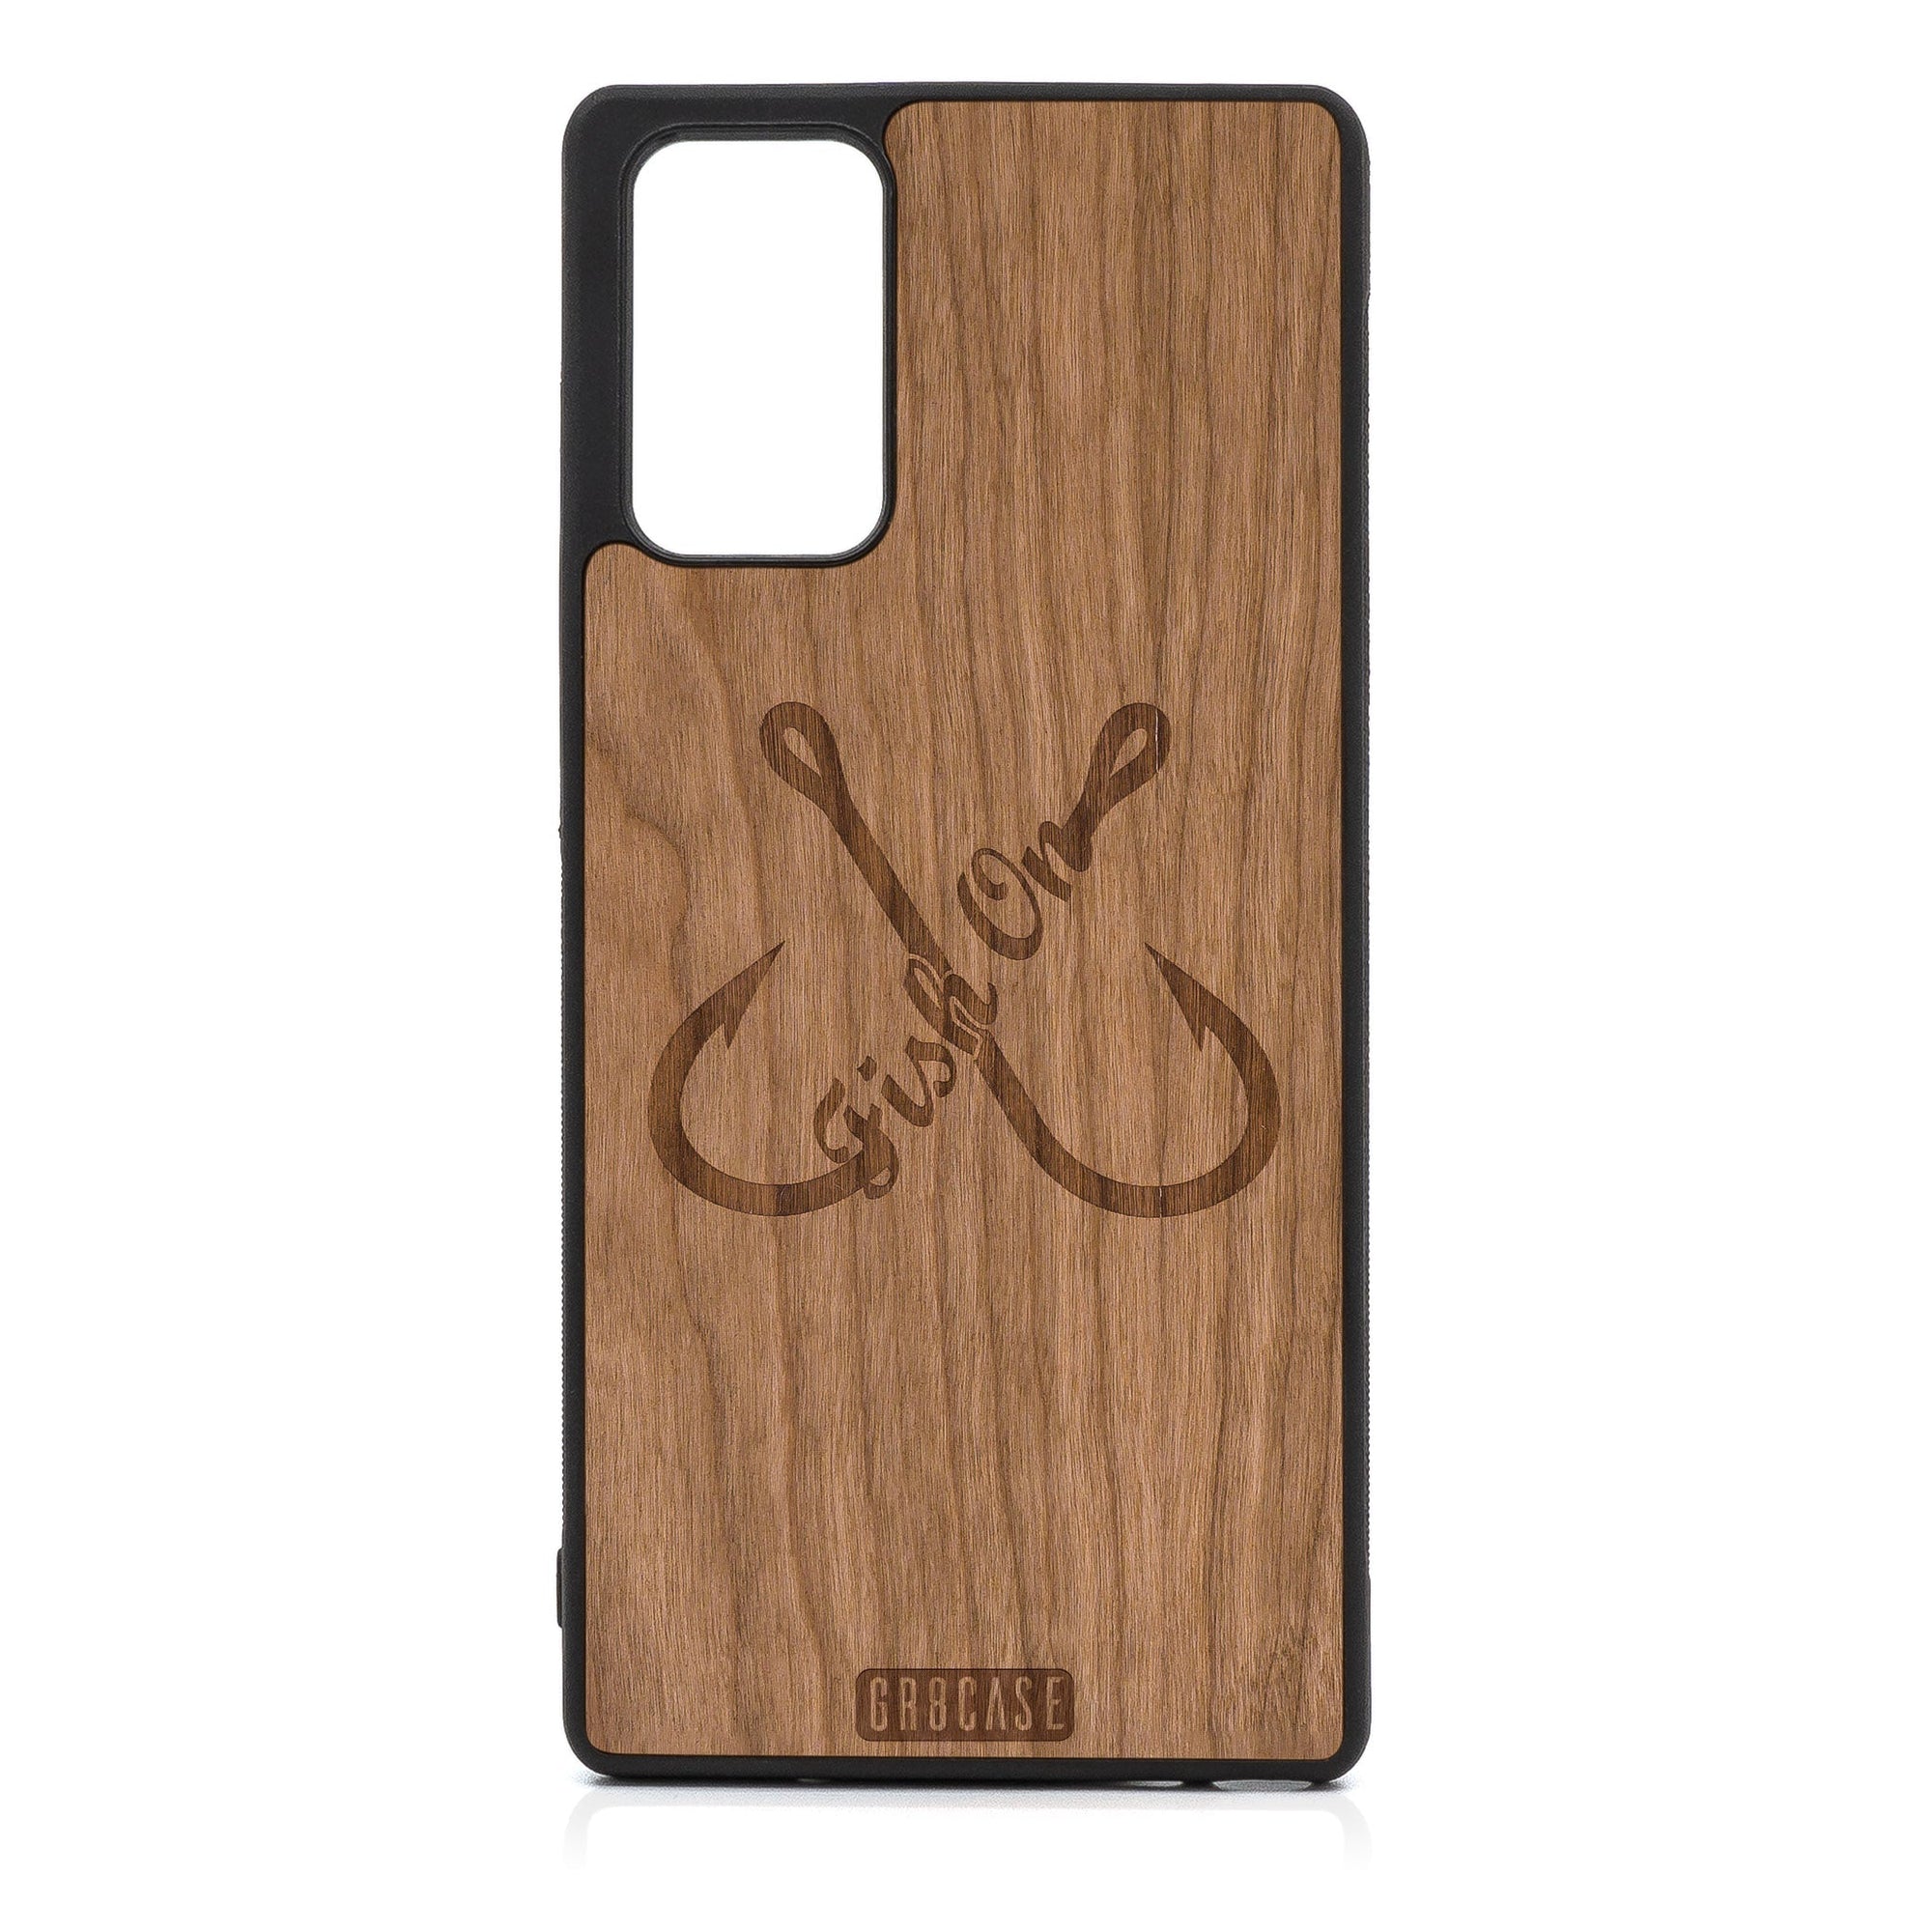 Fish On (Fish Hooks) Design Wood Case For Samsung Galaxy A71 5G